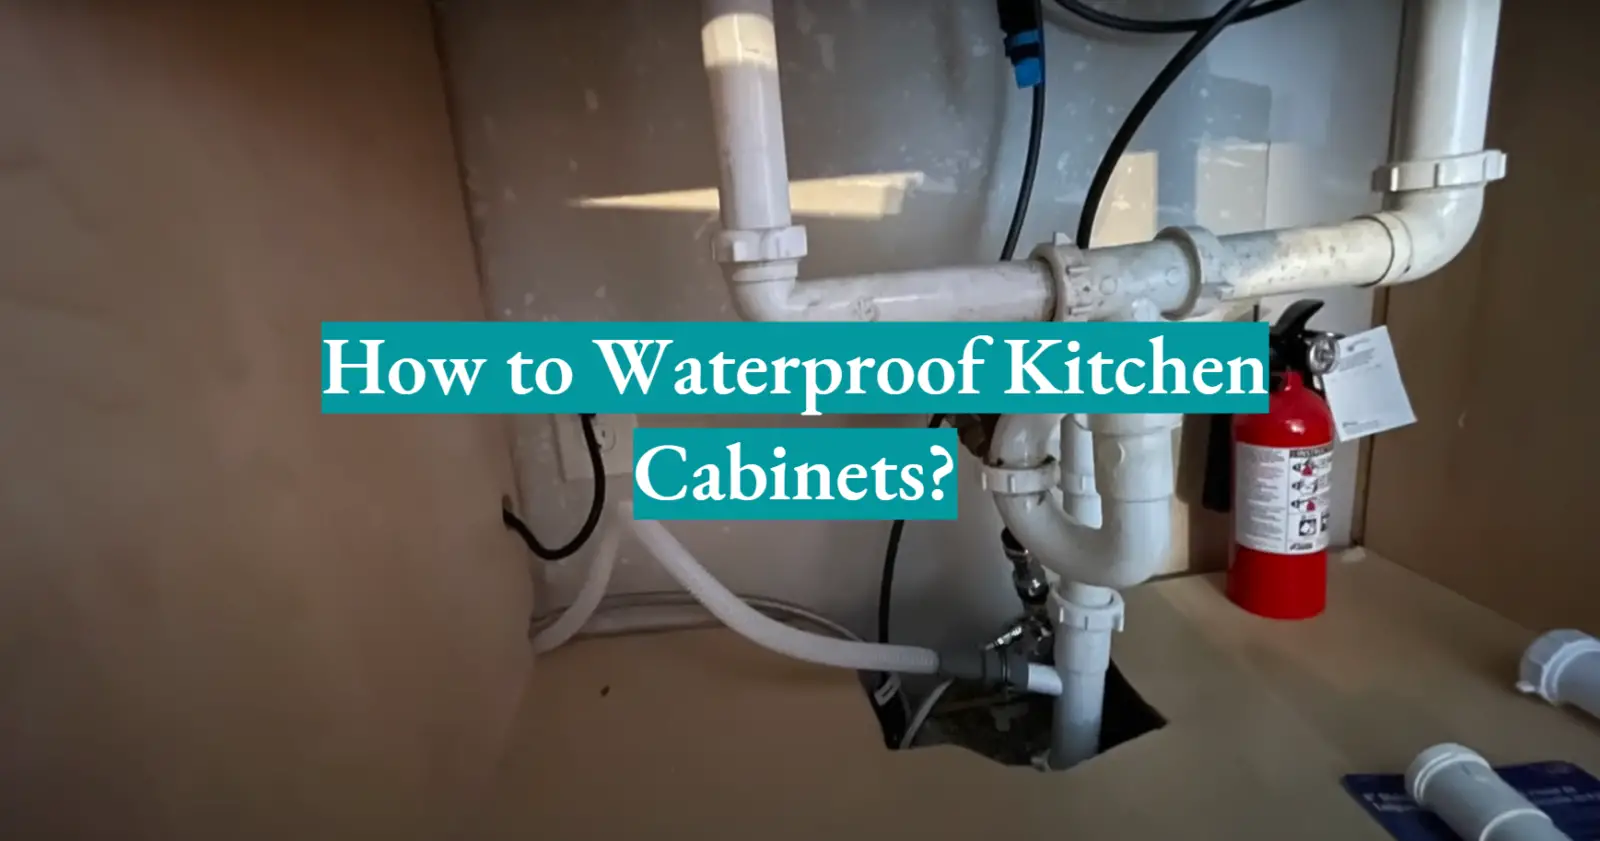 How to Waterproof Kitchen Cabinets?